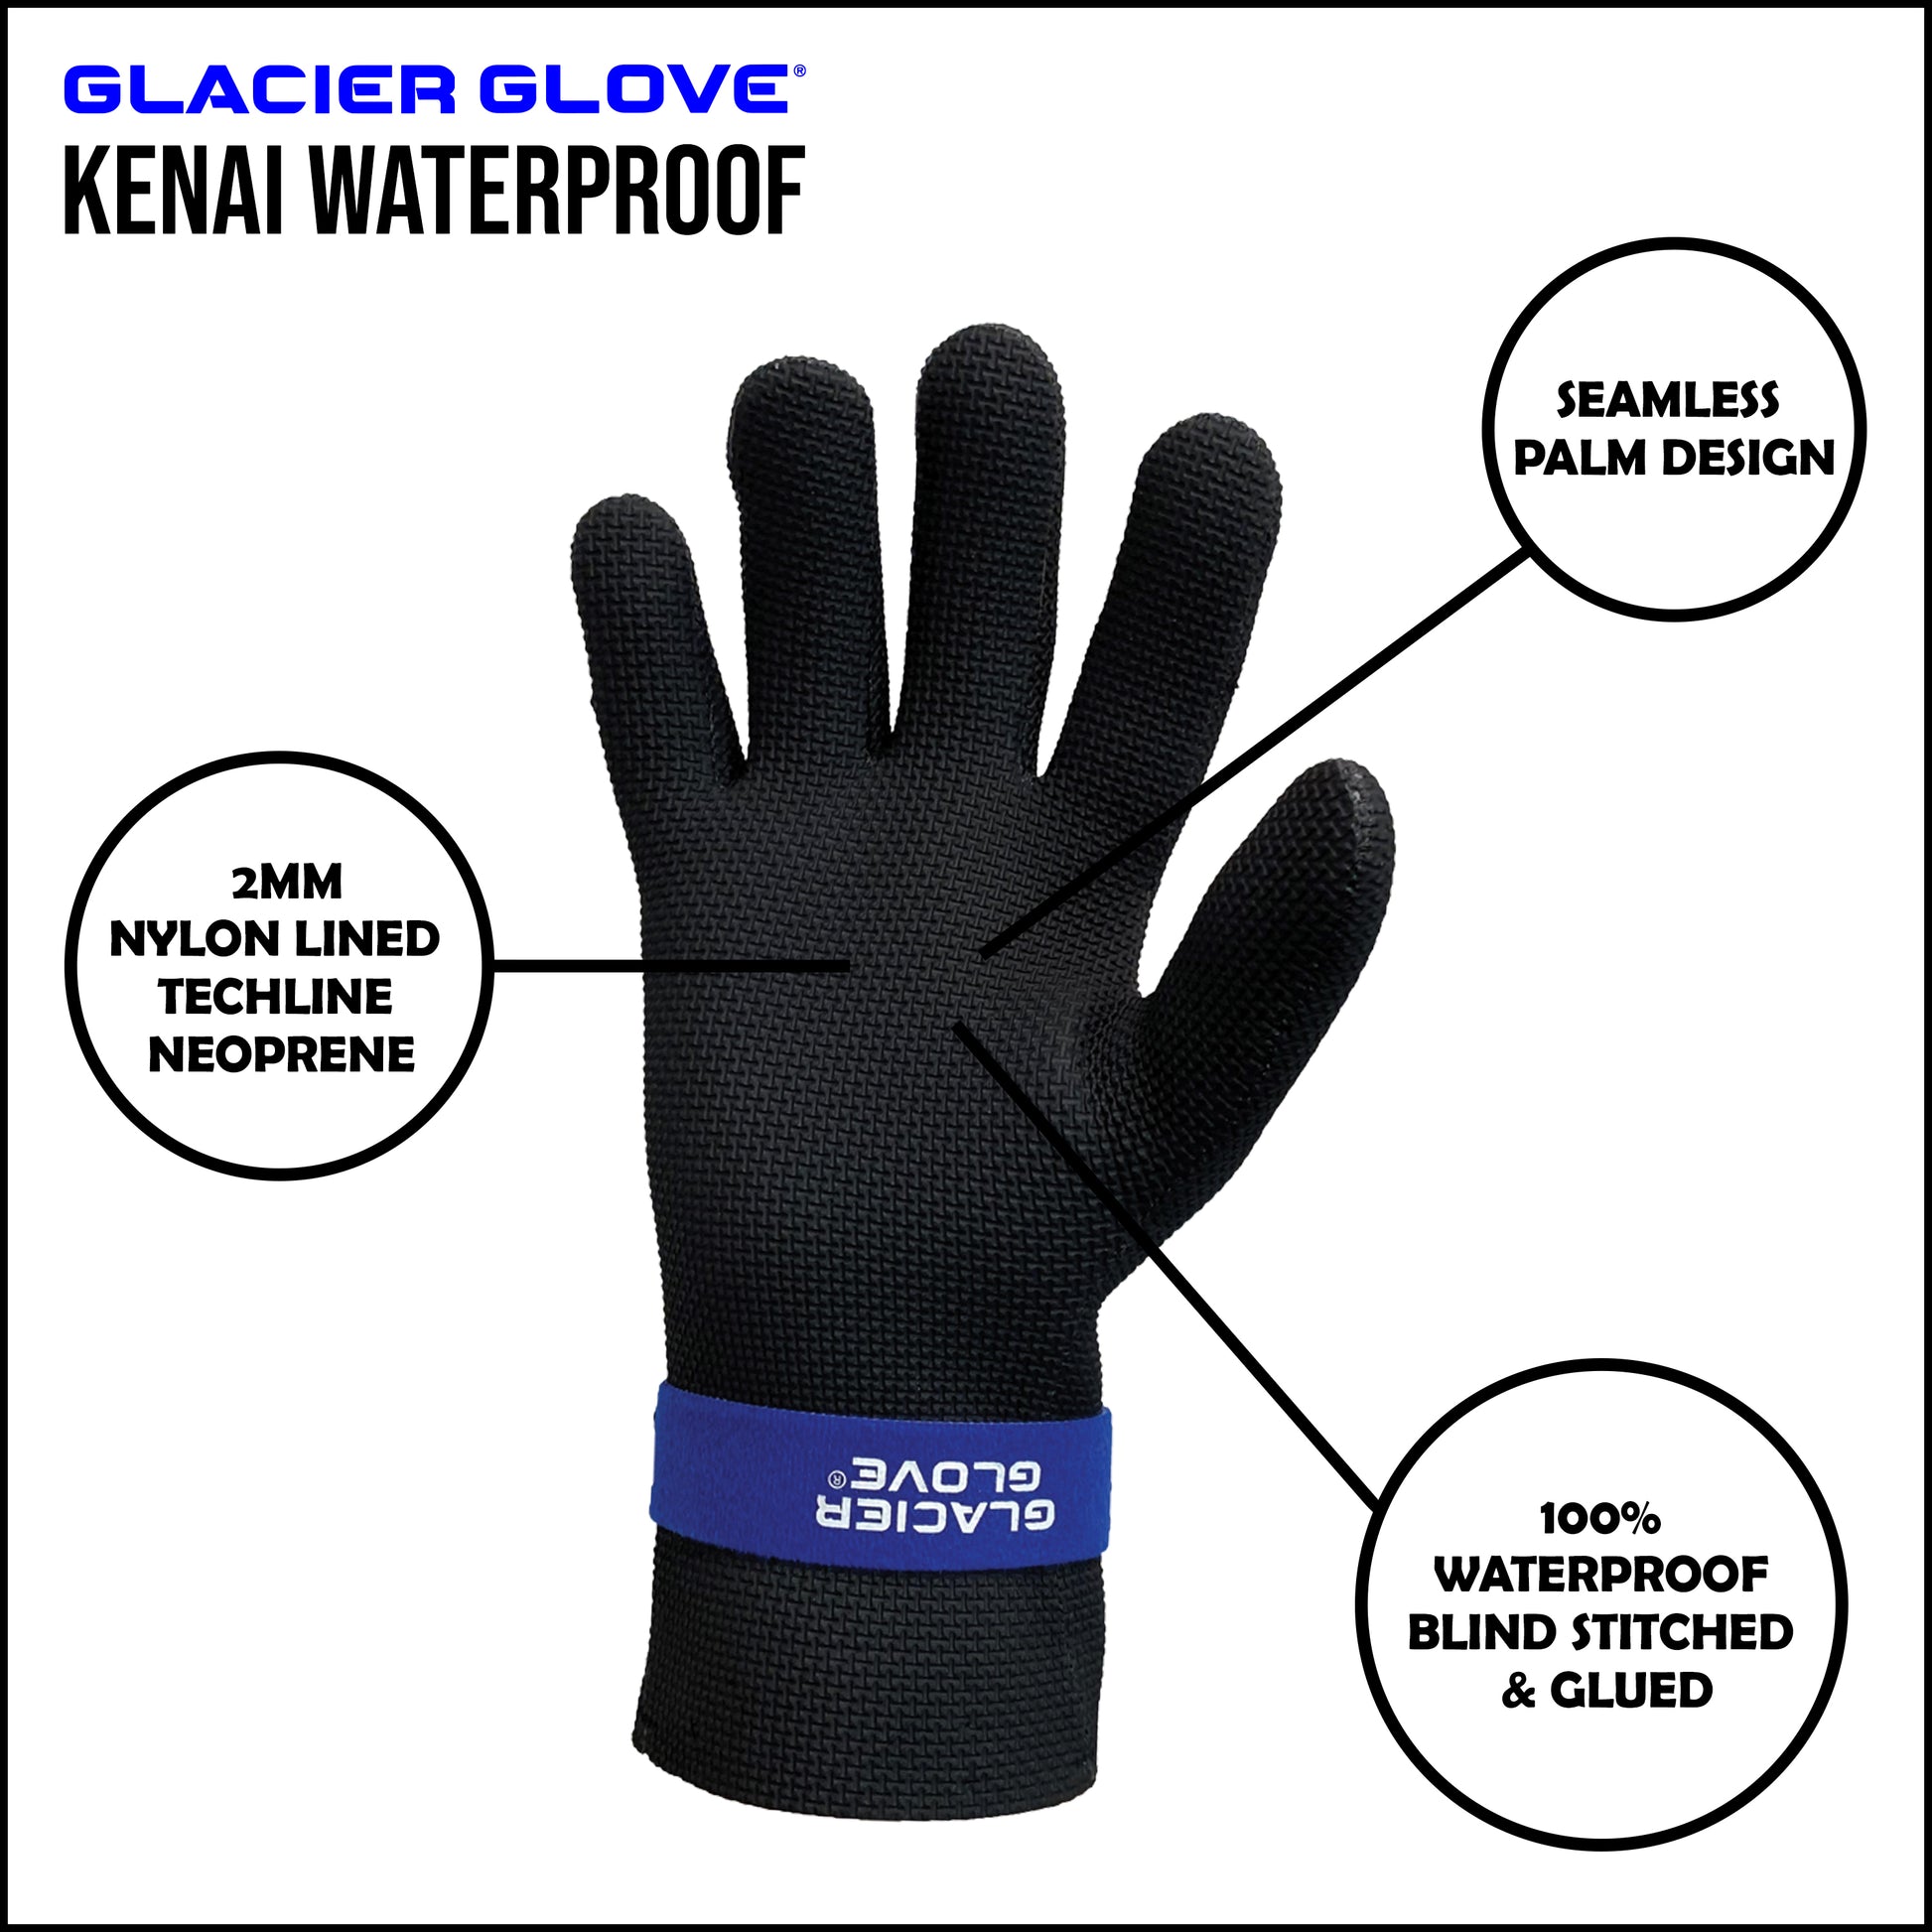 Outdoor Waterproof Neoprene Gloves for Winter Touch Screen and